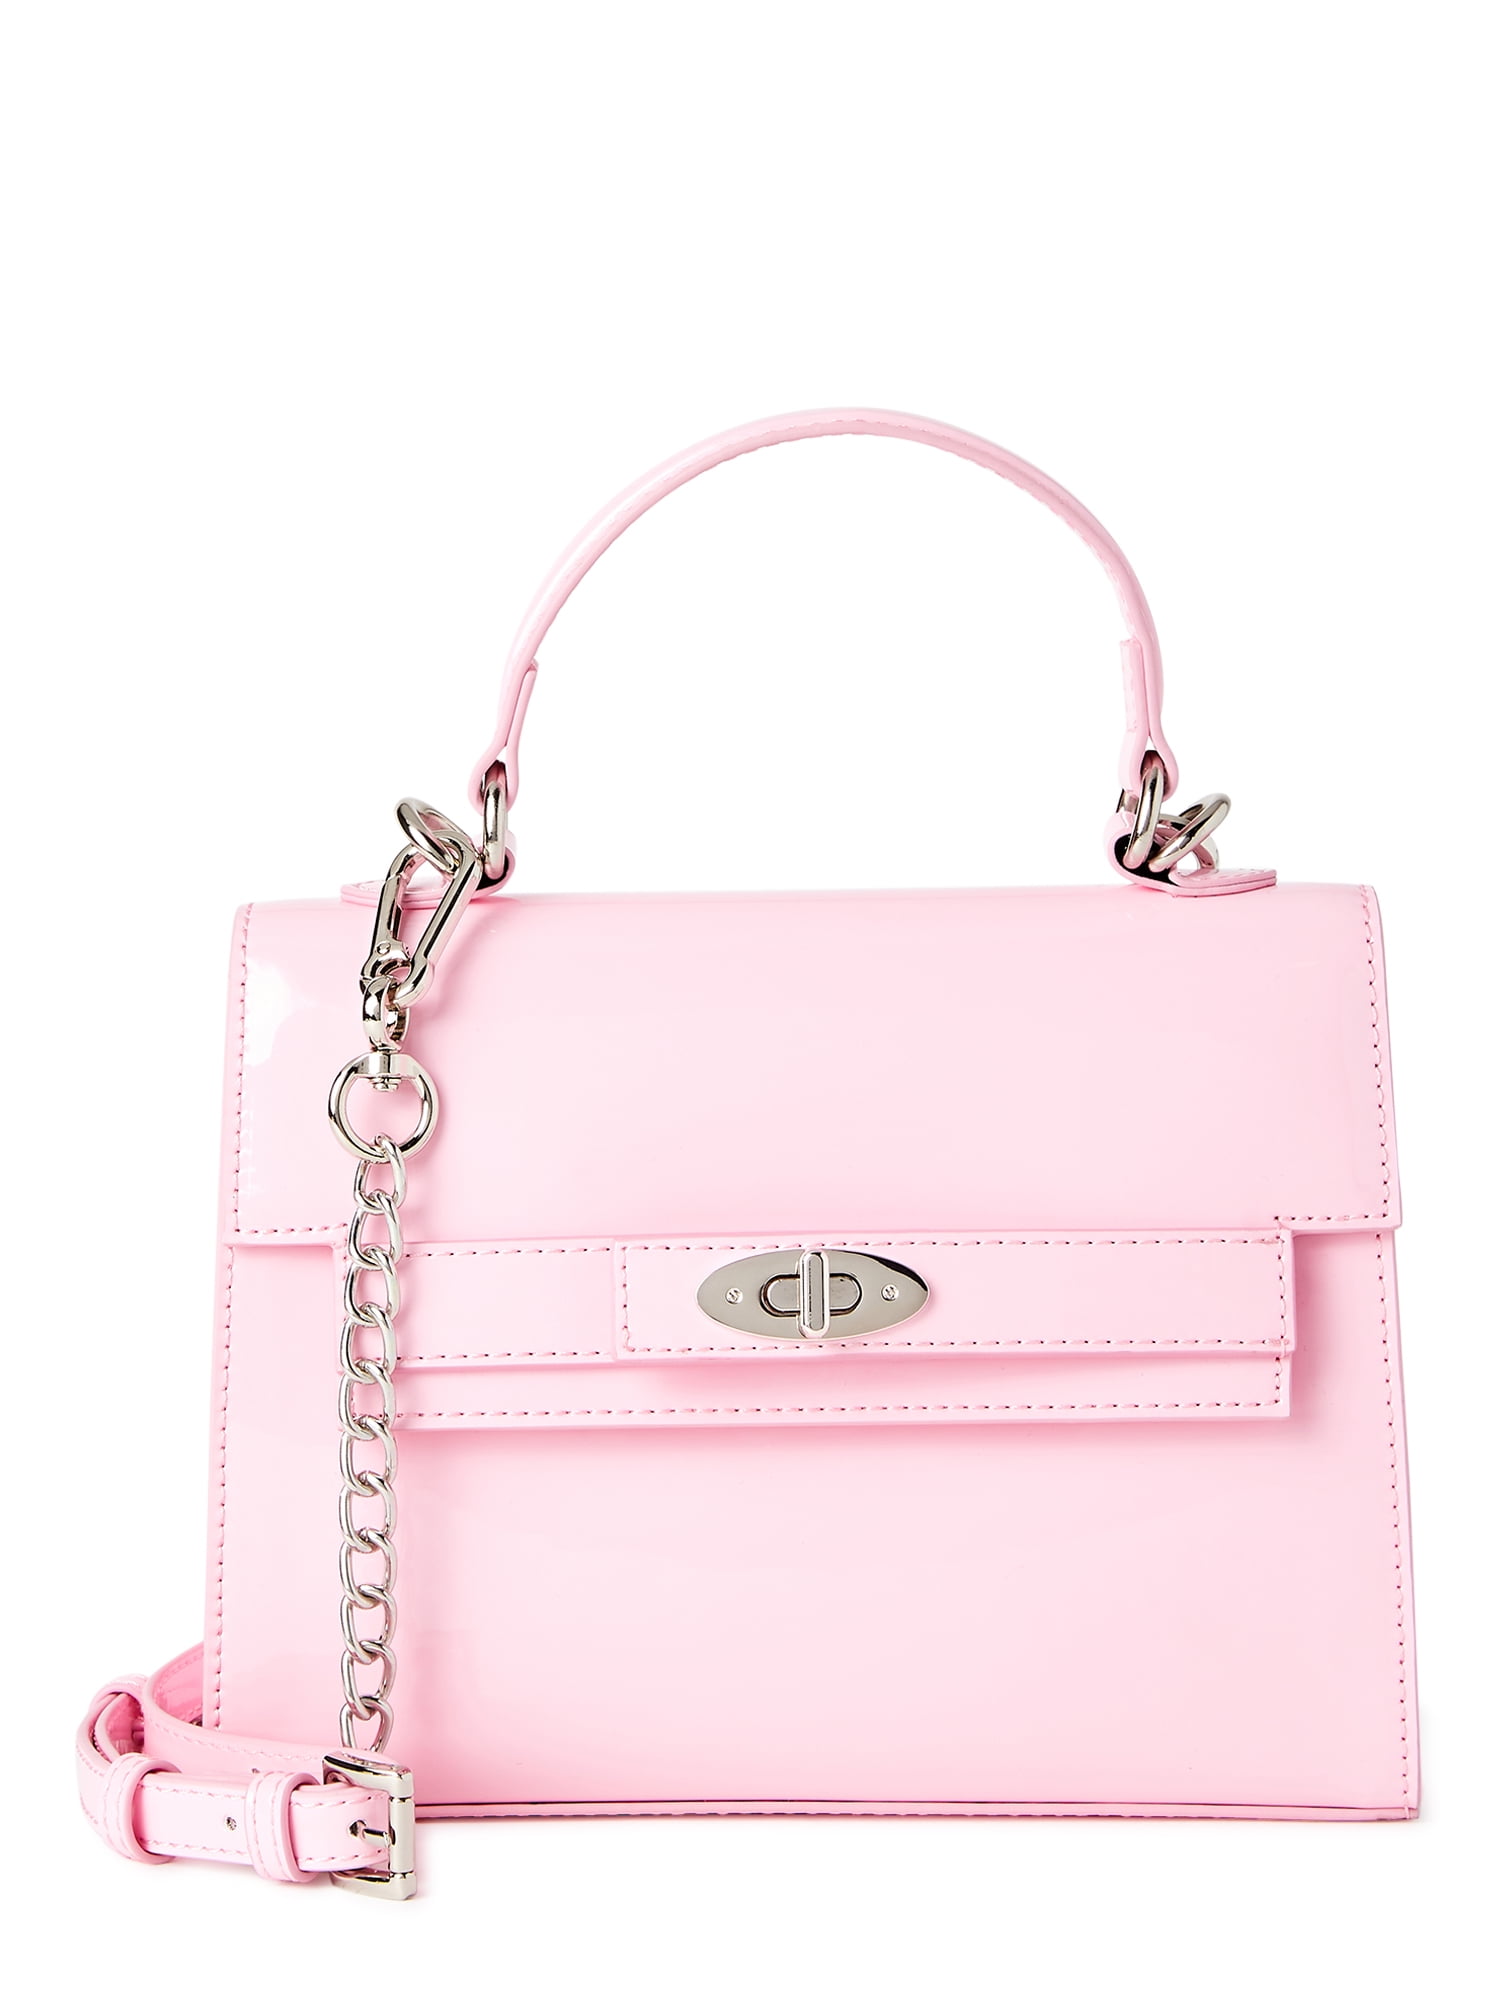 Madden NYC Women's Boxy Top Handle Bag Light Pink